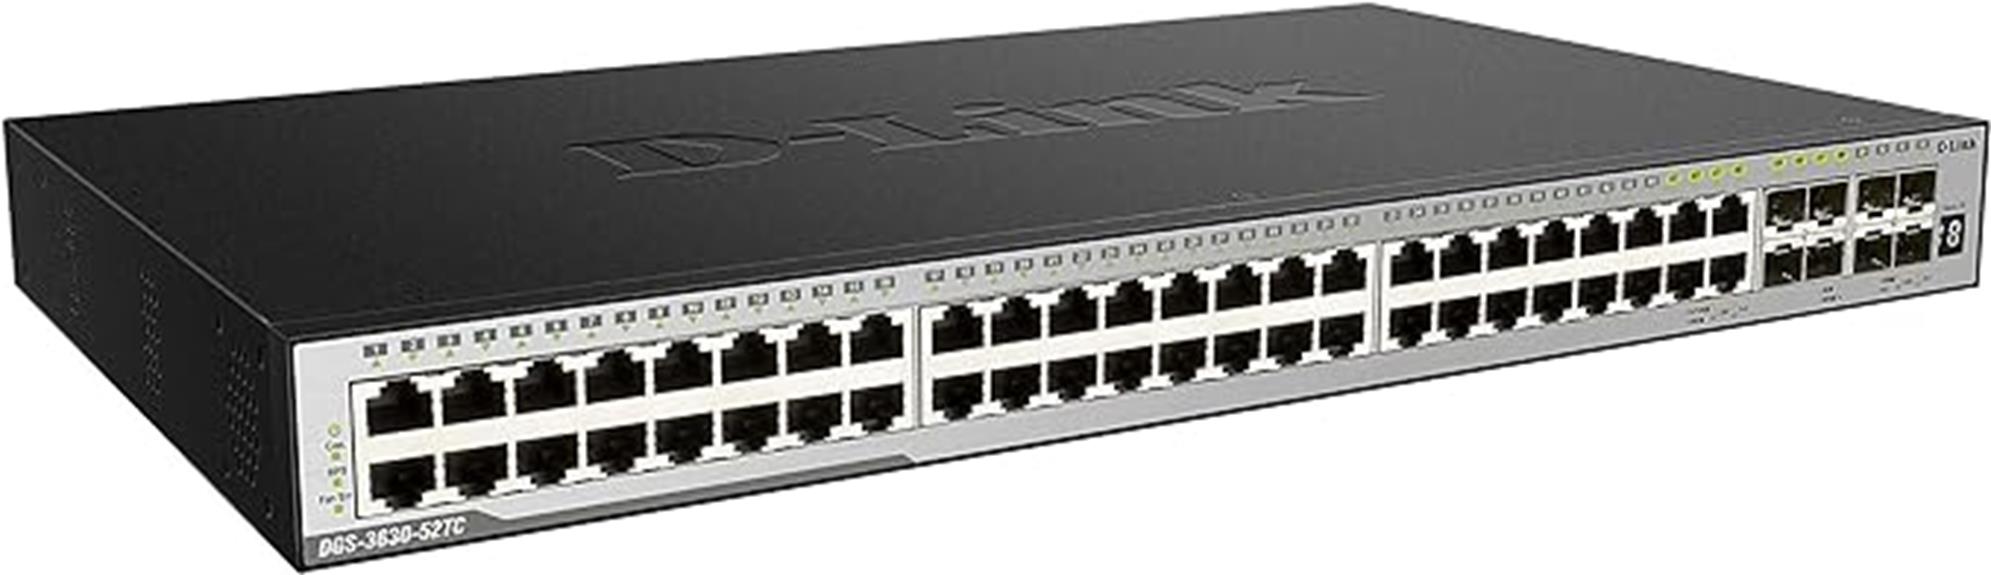 d link switch performance review